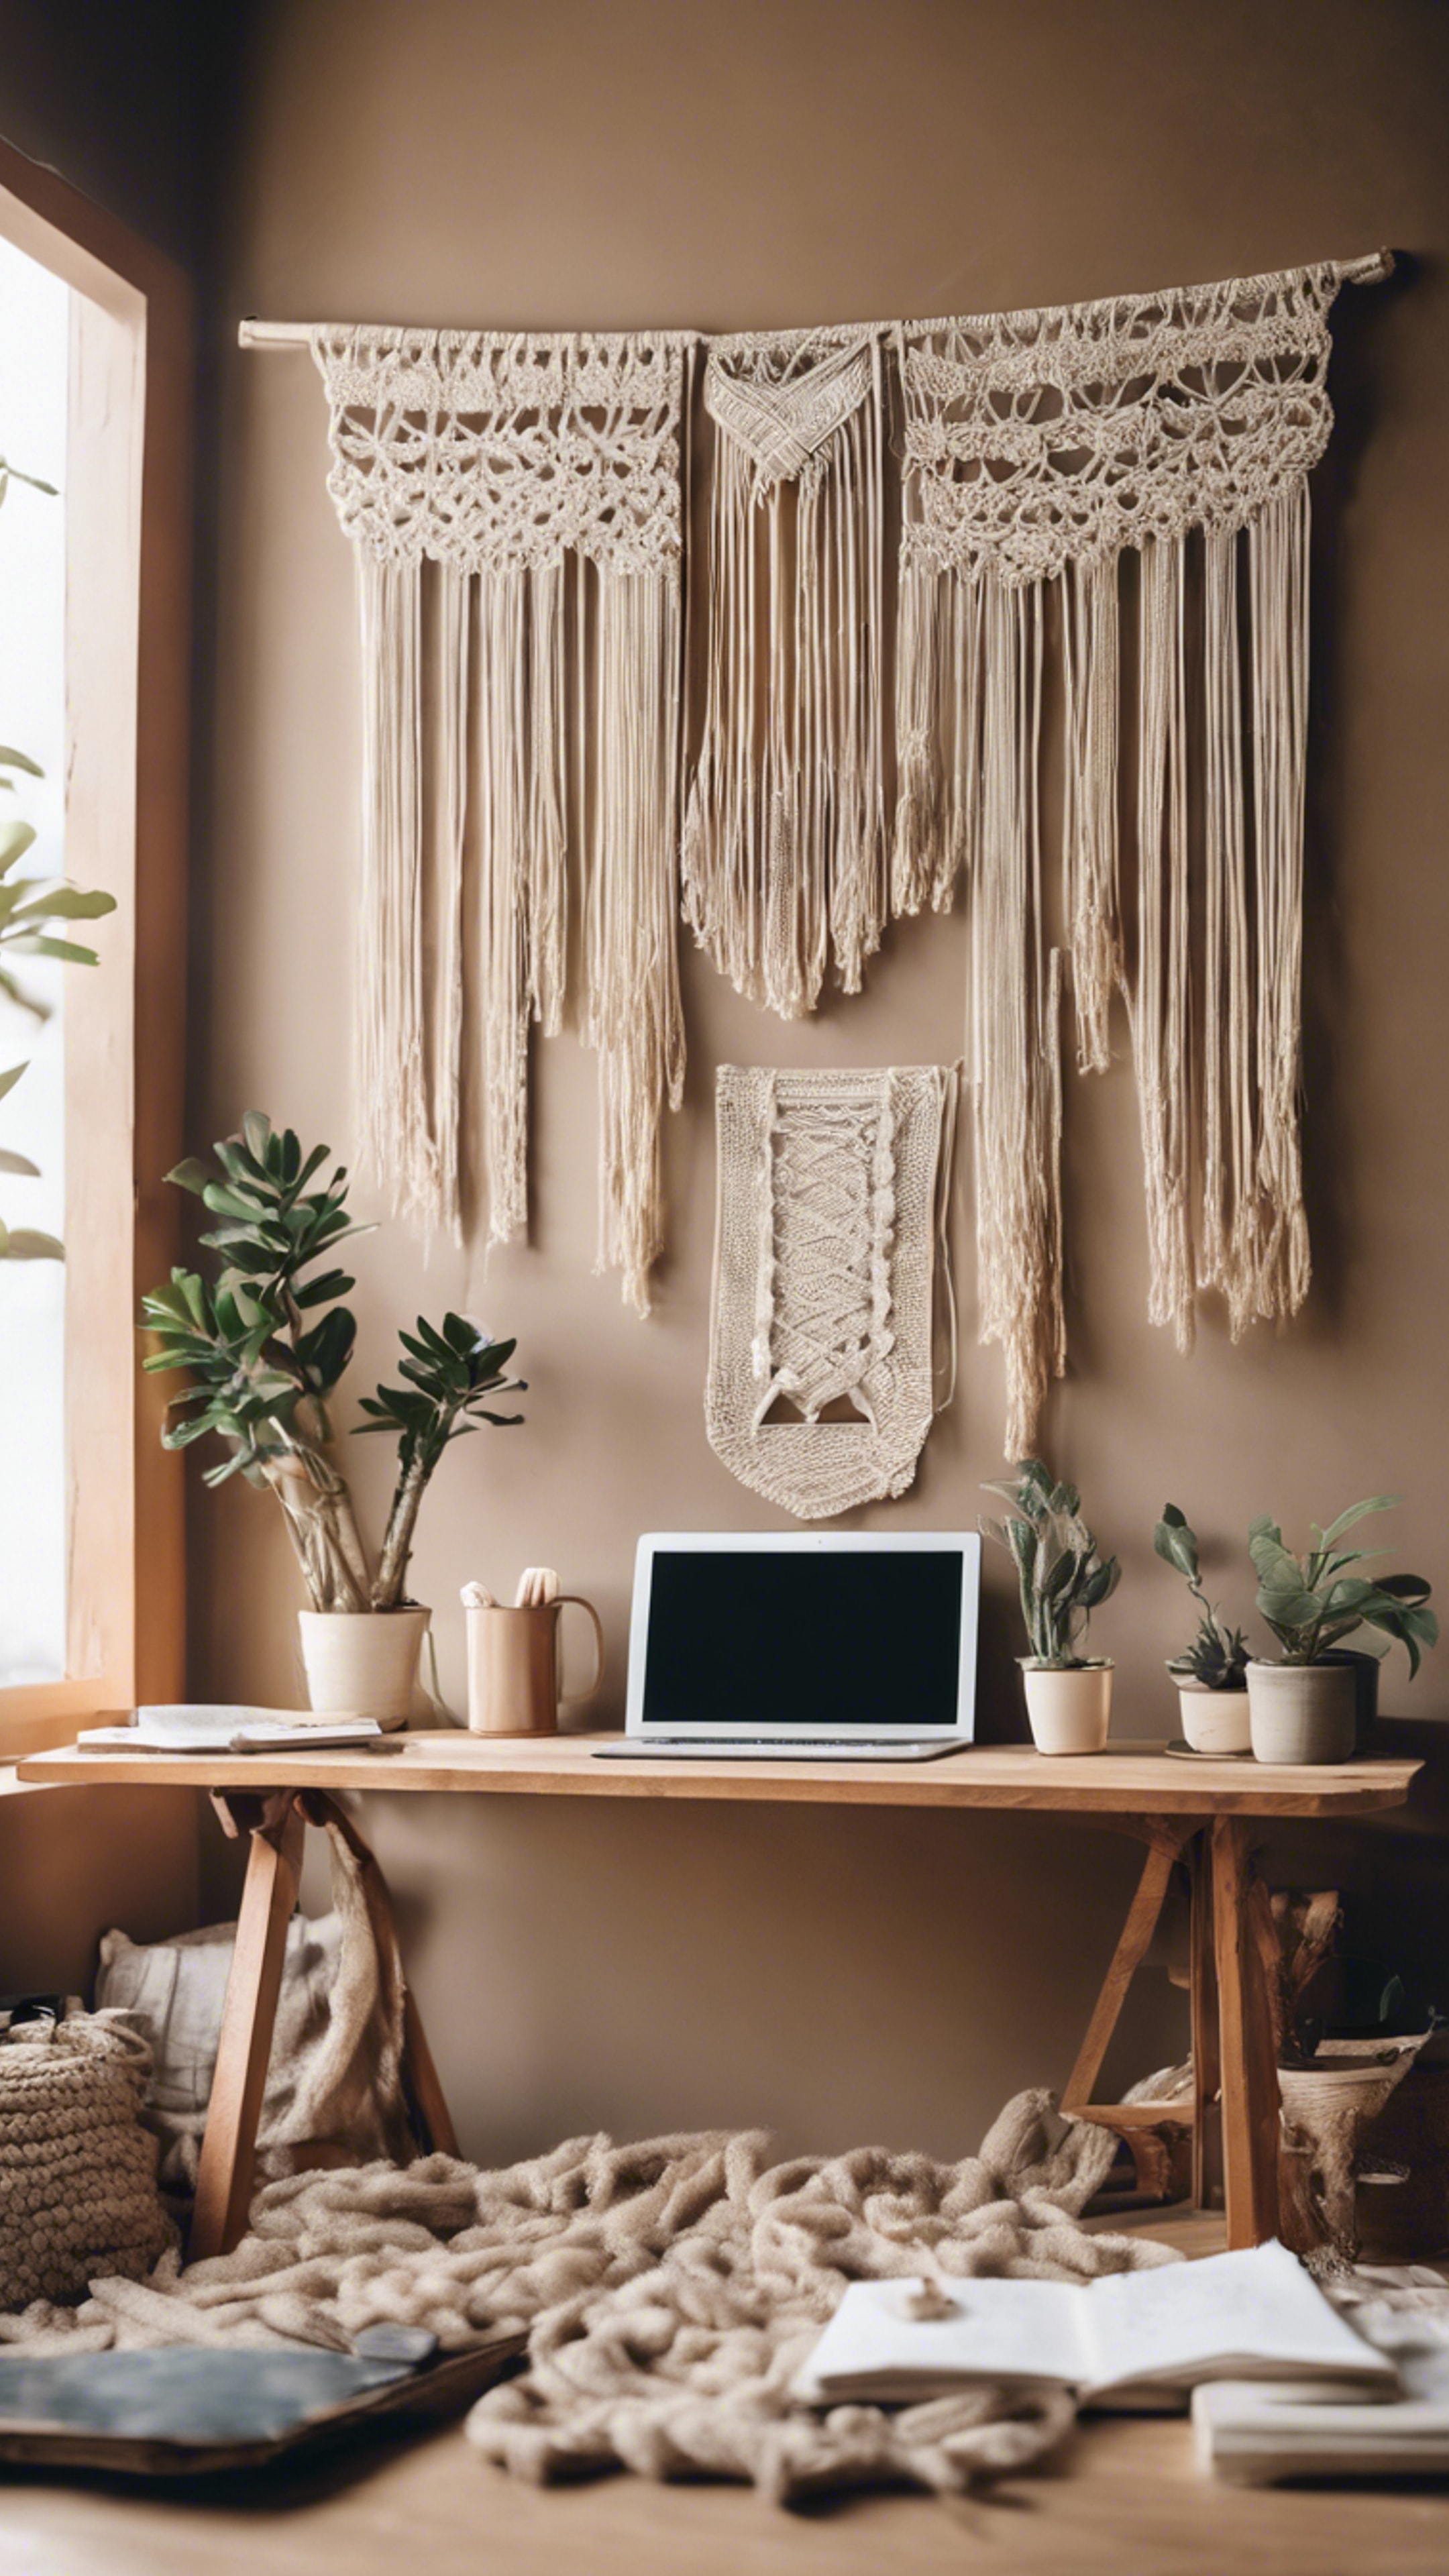 A neatly arranged workspace with beige tones, macrame wall hanging, and wooden desk. Wallpaper[e343d727e93c434c8f0c]